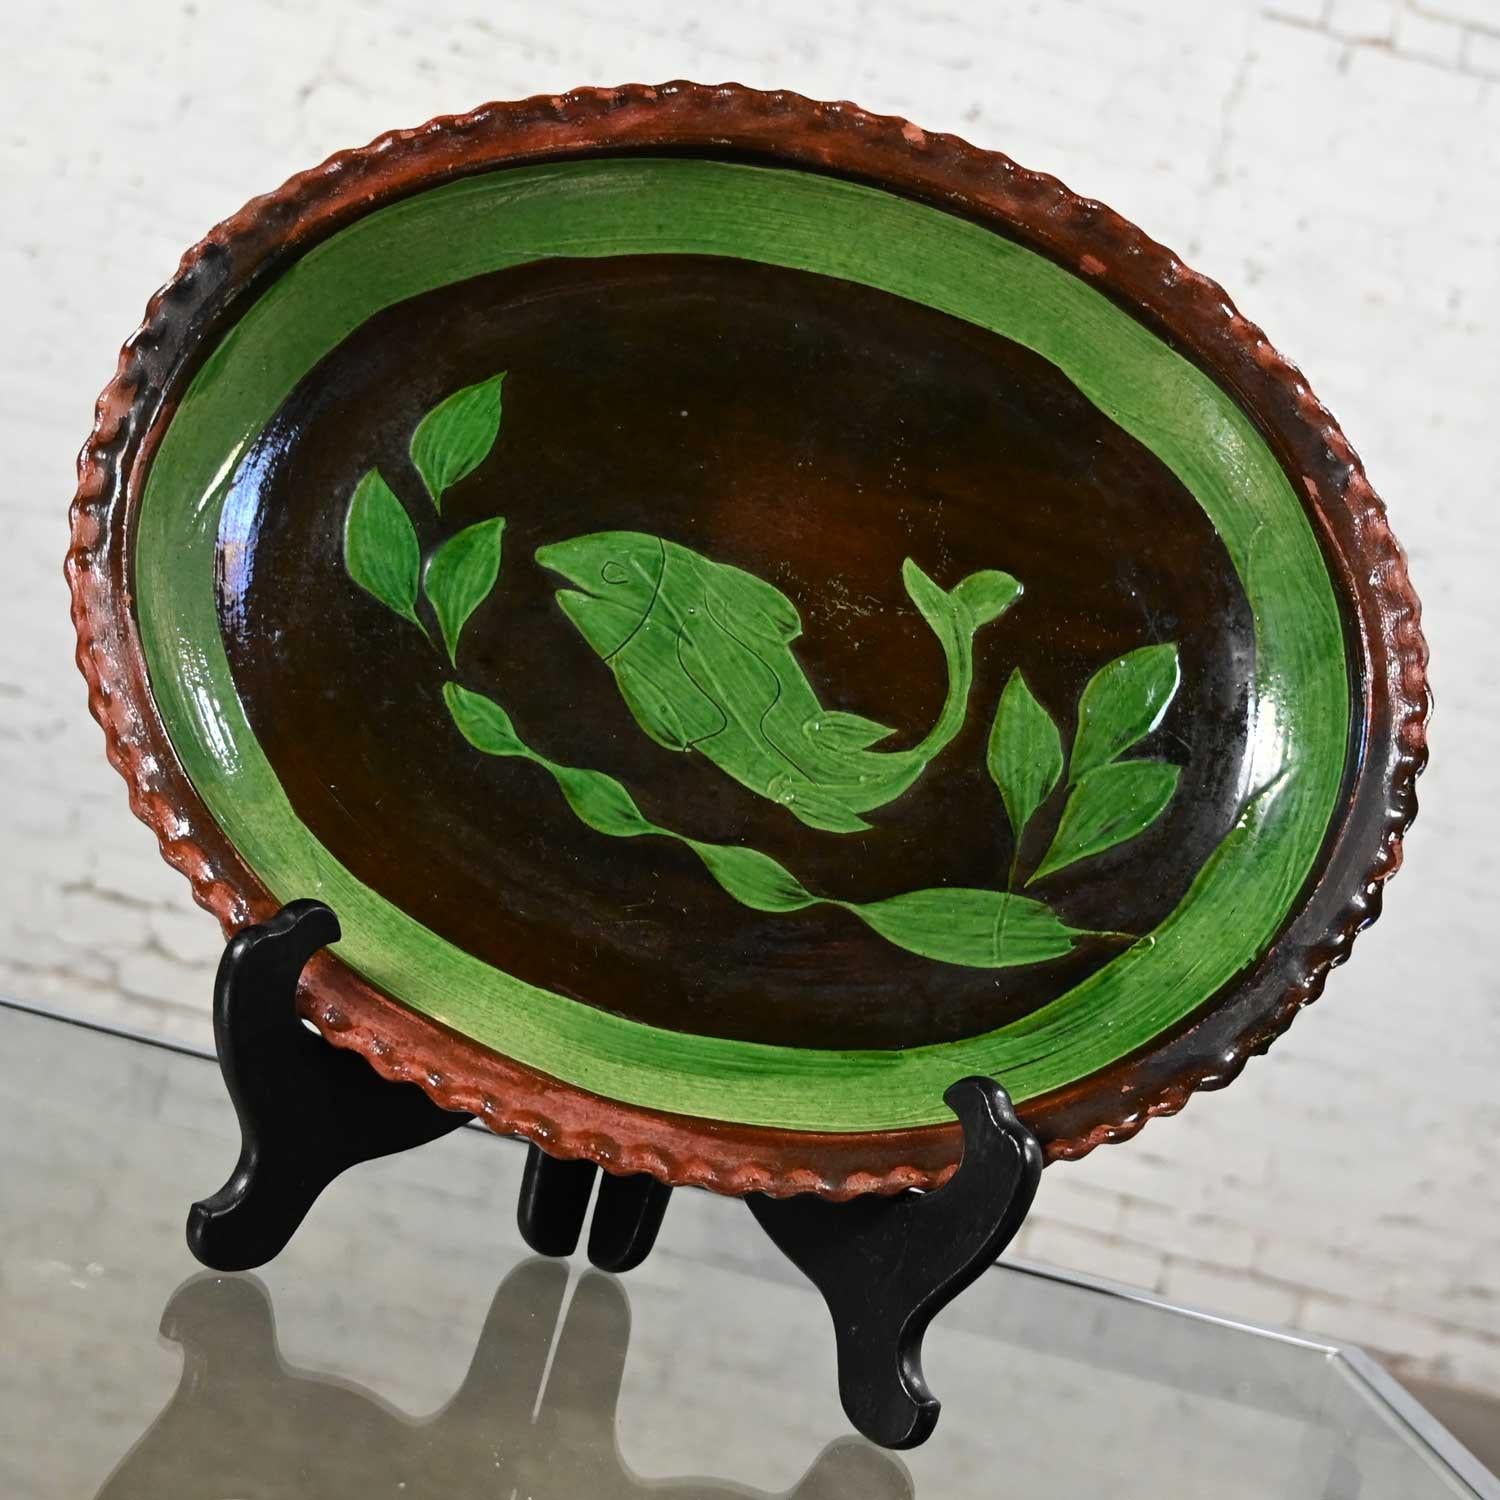 Stunning Mexican Patamban hand painted fish design Folk Art green and brown glazed pottery platter. Beautiful condition, keeping in mind that this is vintage and not new so will have signs of use and wear. There is one small imperfection on the rim